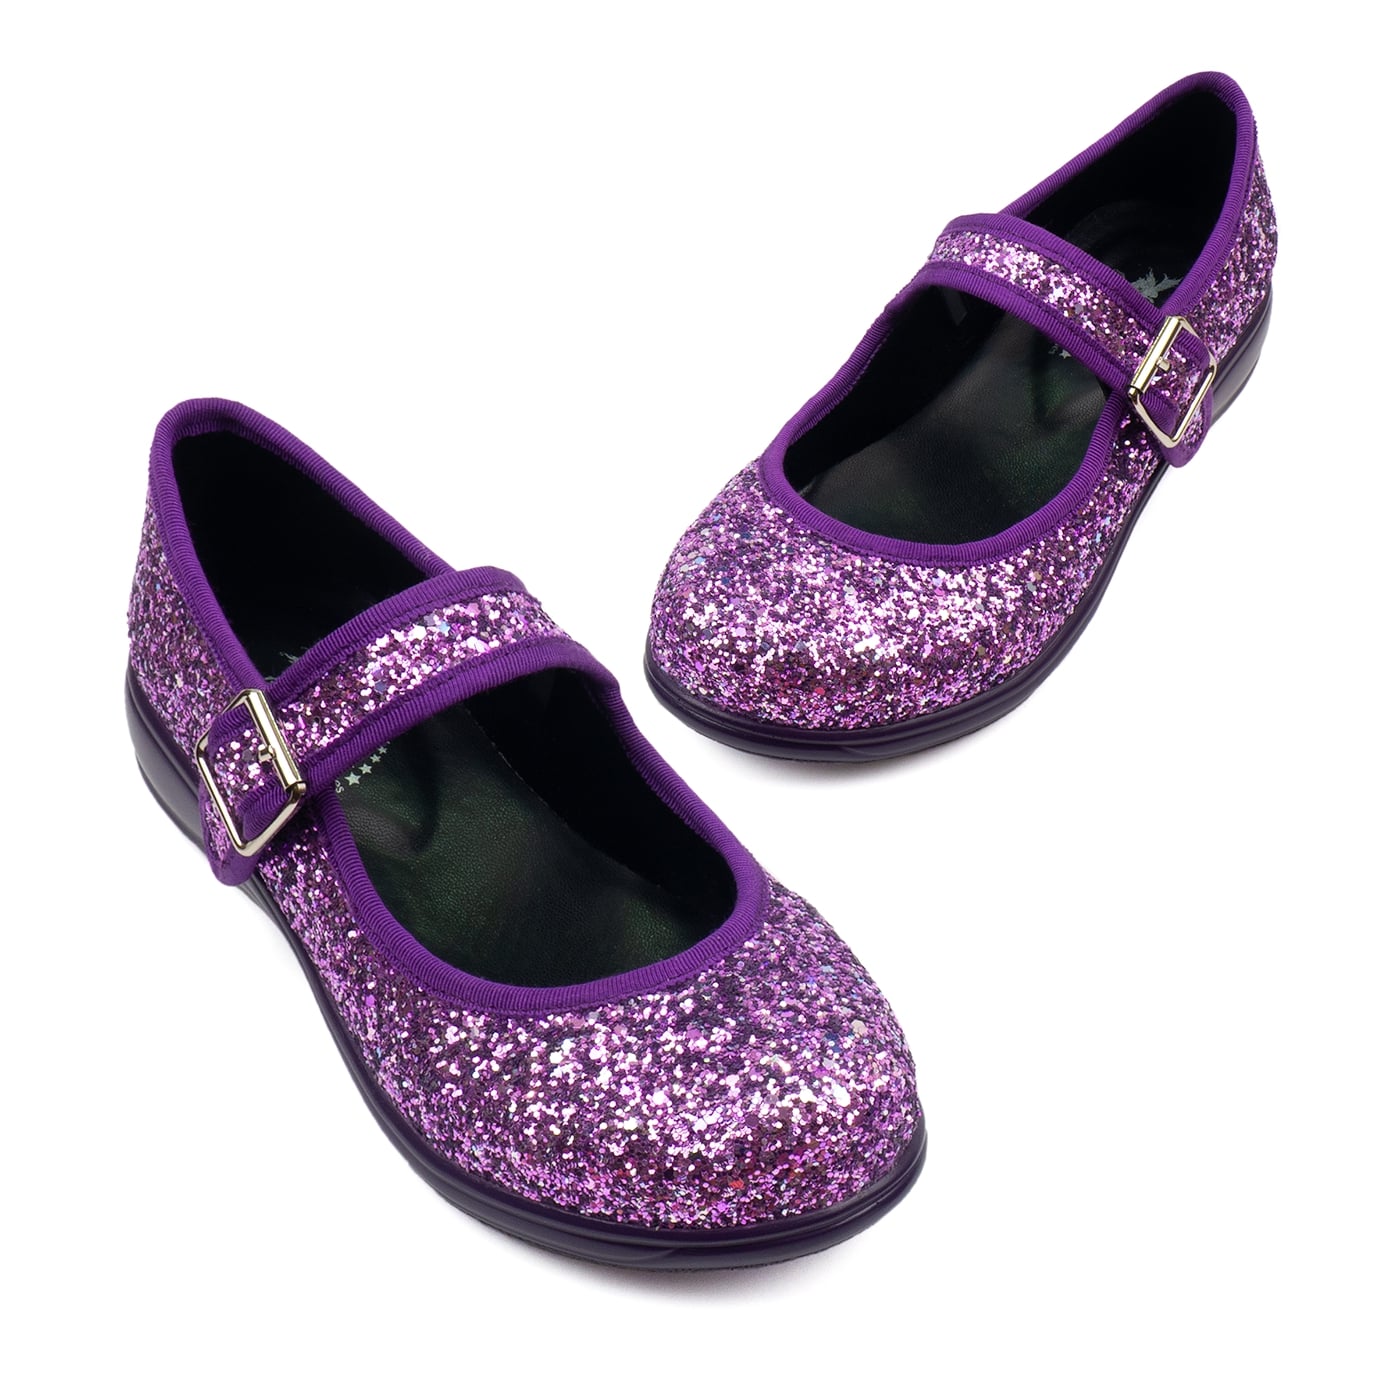 Amethyst Mary Janes by RainbowsAndFairies.com (Purple Glitter - Sparkle - Shoes - Buckle Up - Lilac) - SKU: FW_MARYJ_AMTHS_ORG - Pic 01